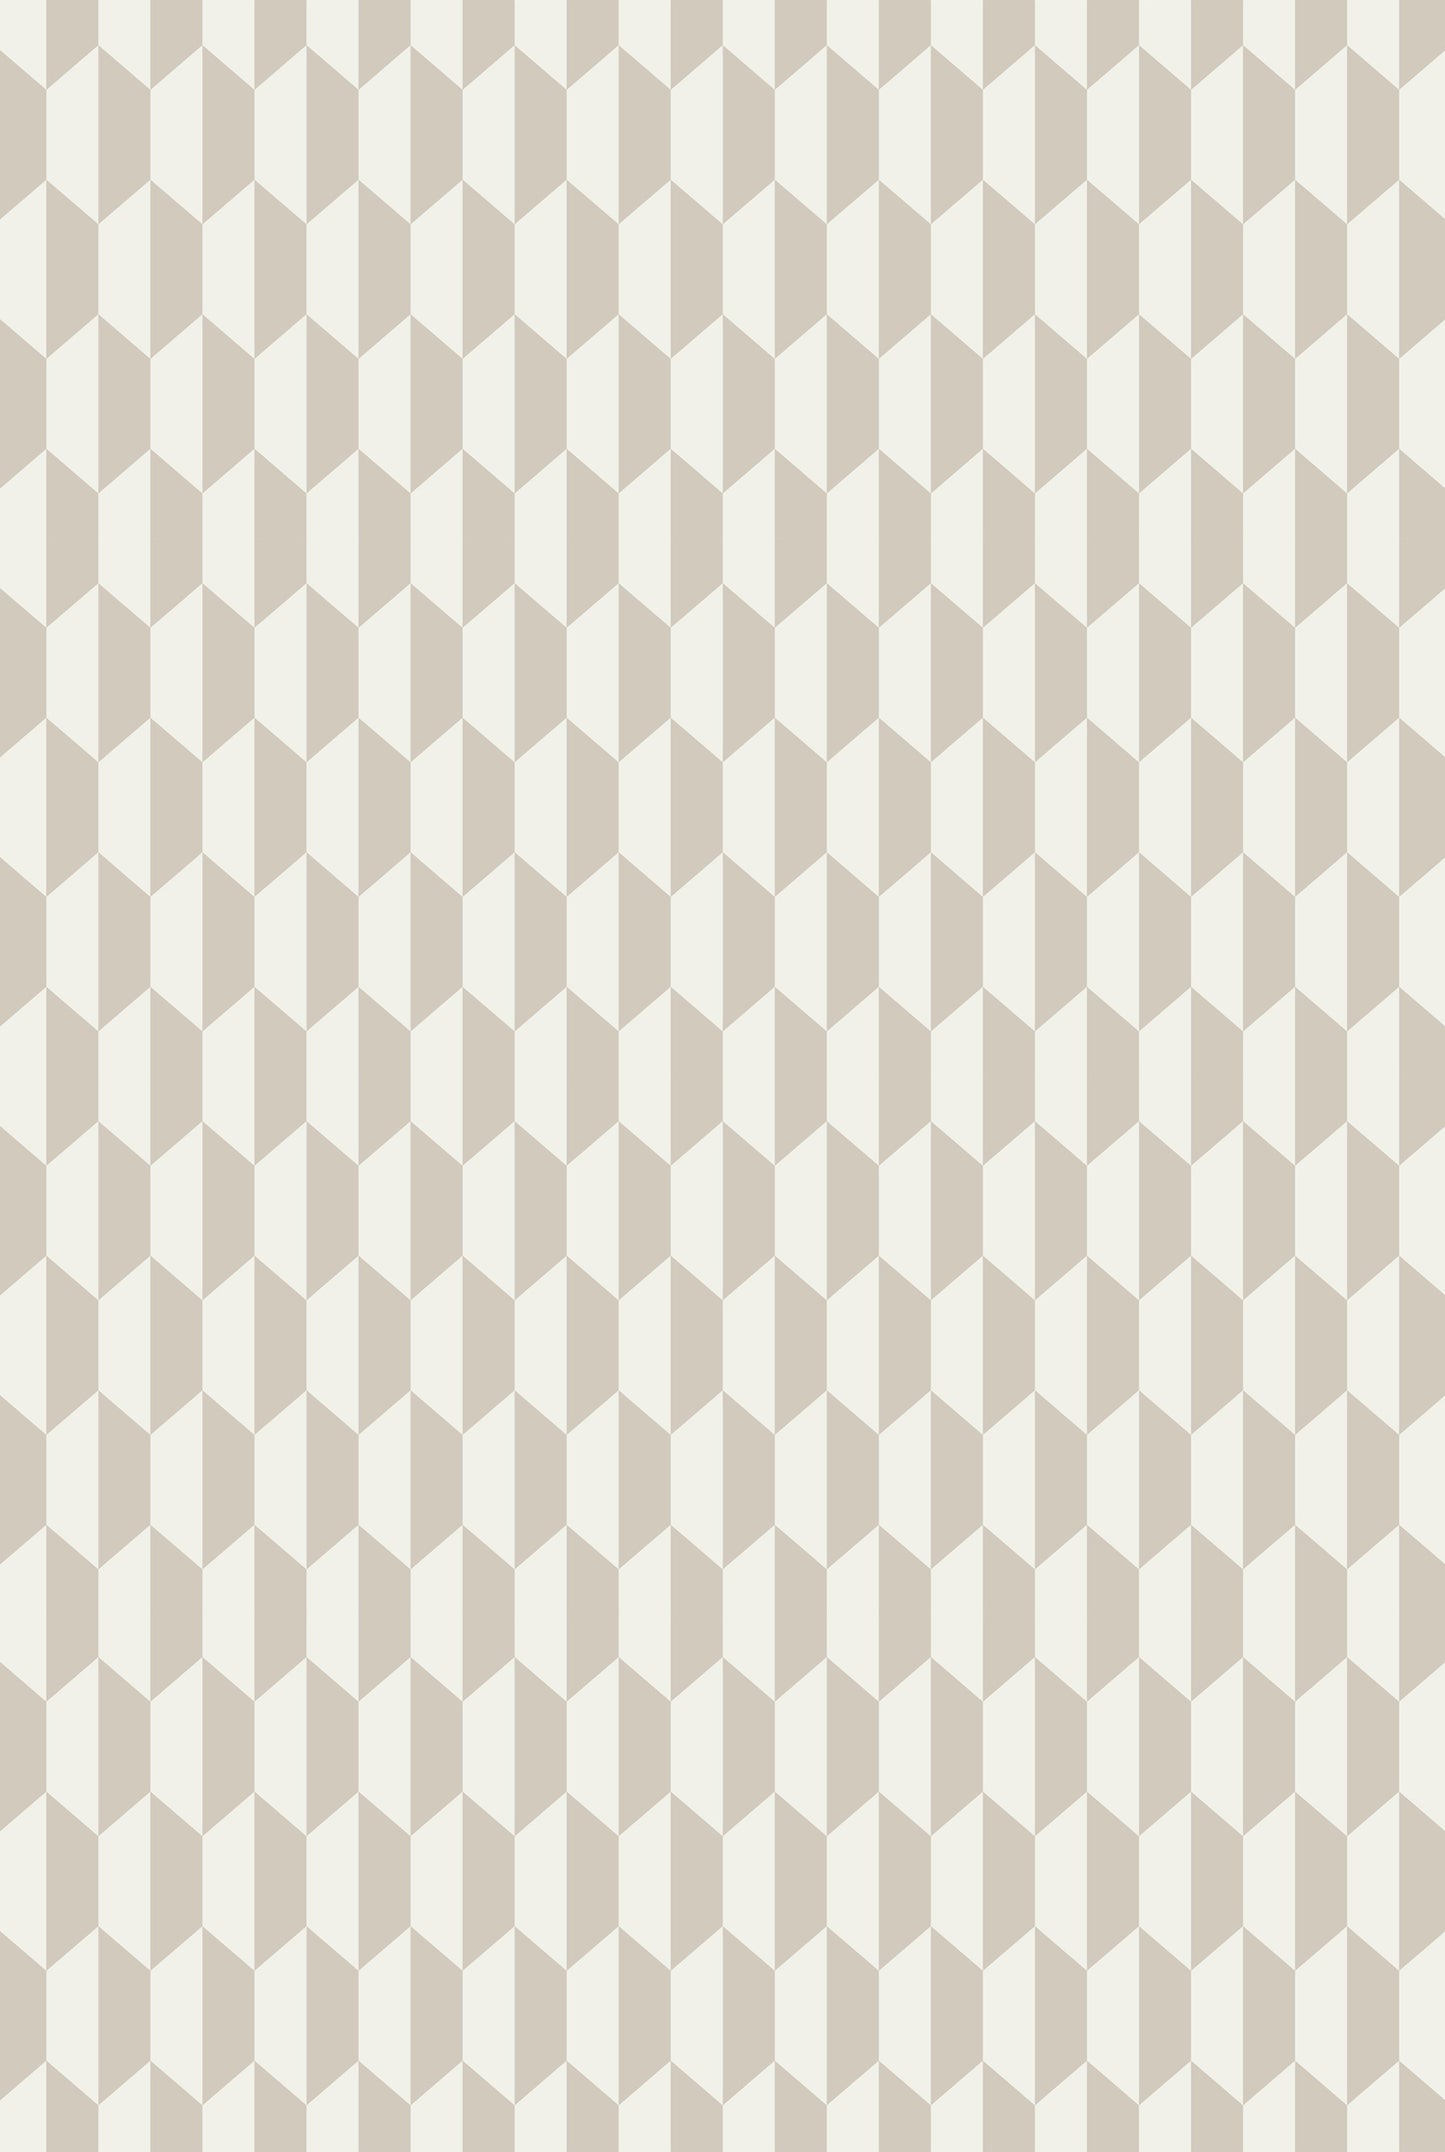 Tile Fabric F111/9033 By Cole & Son